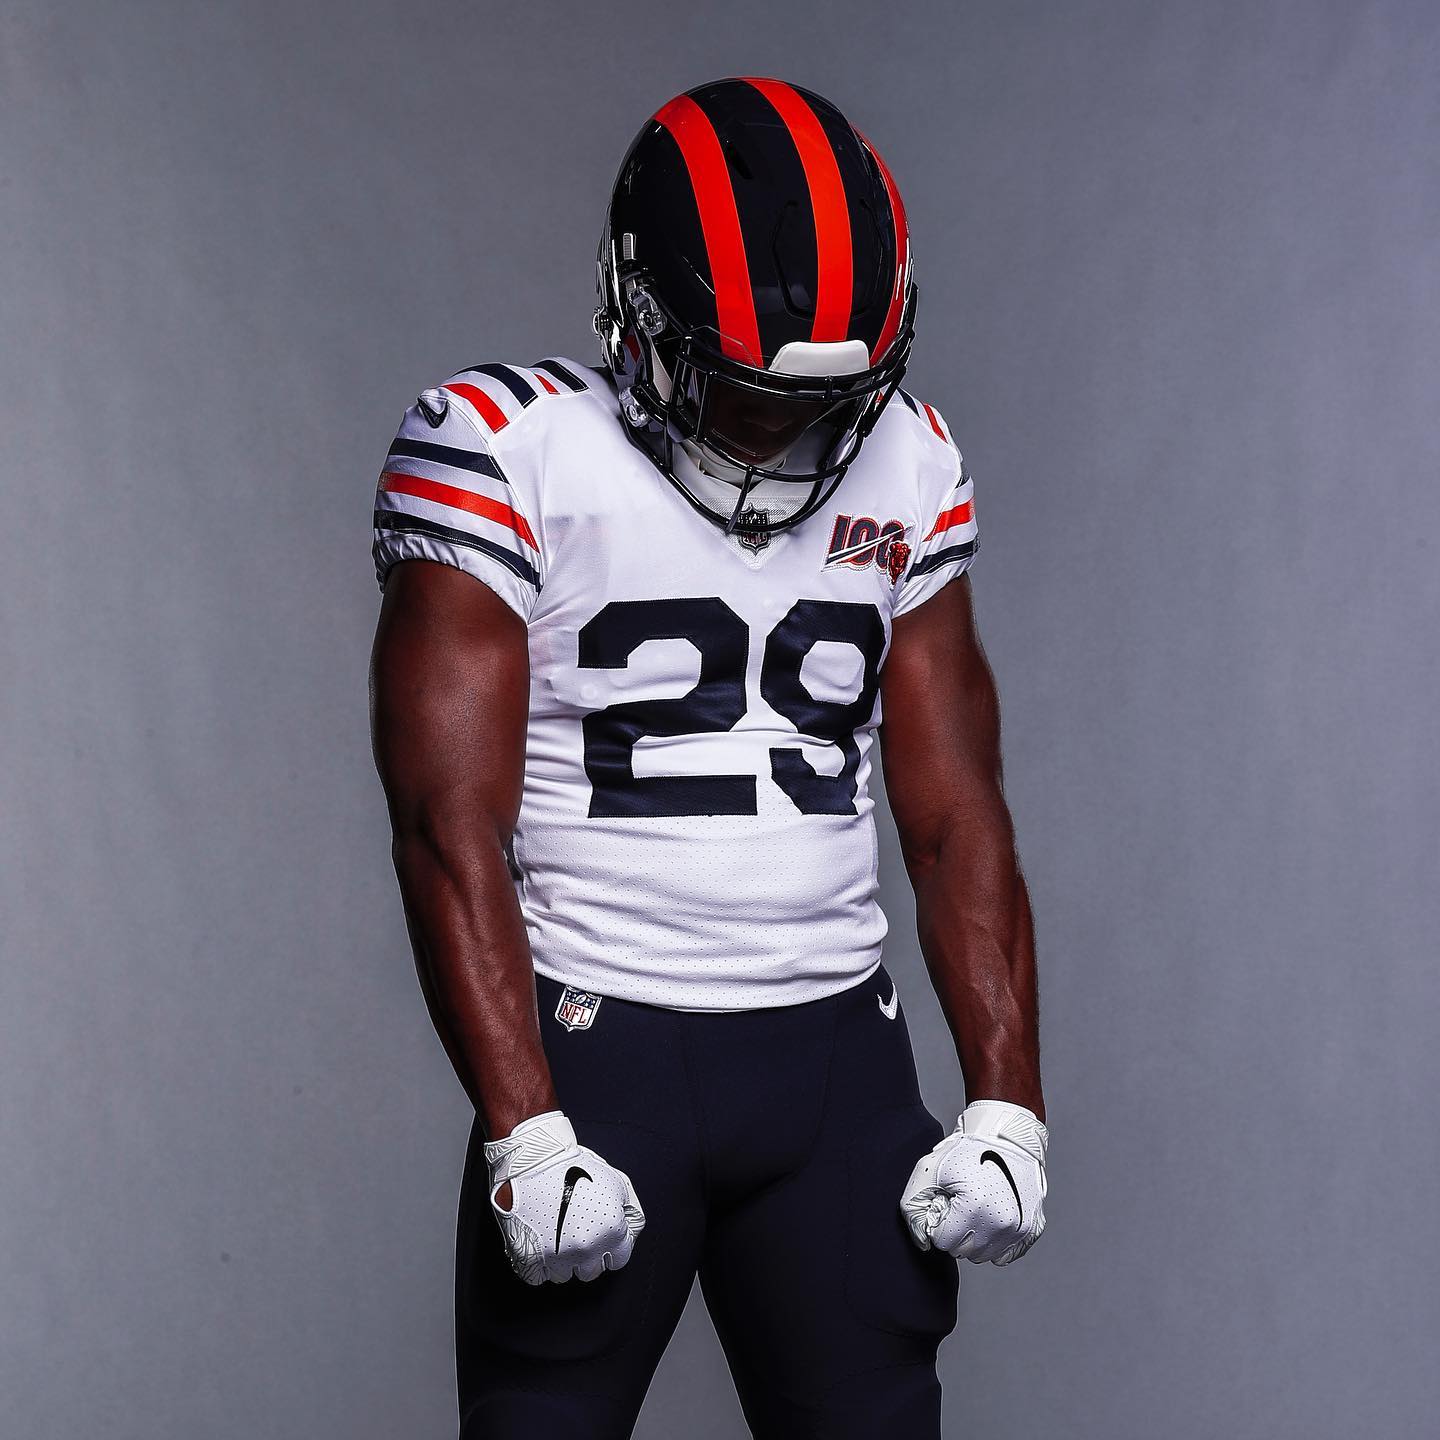 New uniforms. 100th year anniversary classics. Thoughts? : r/CHIBears